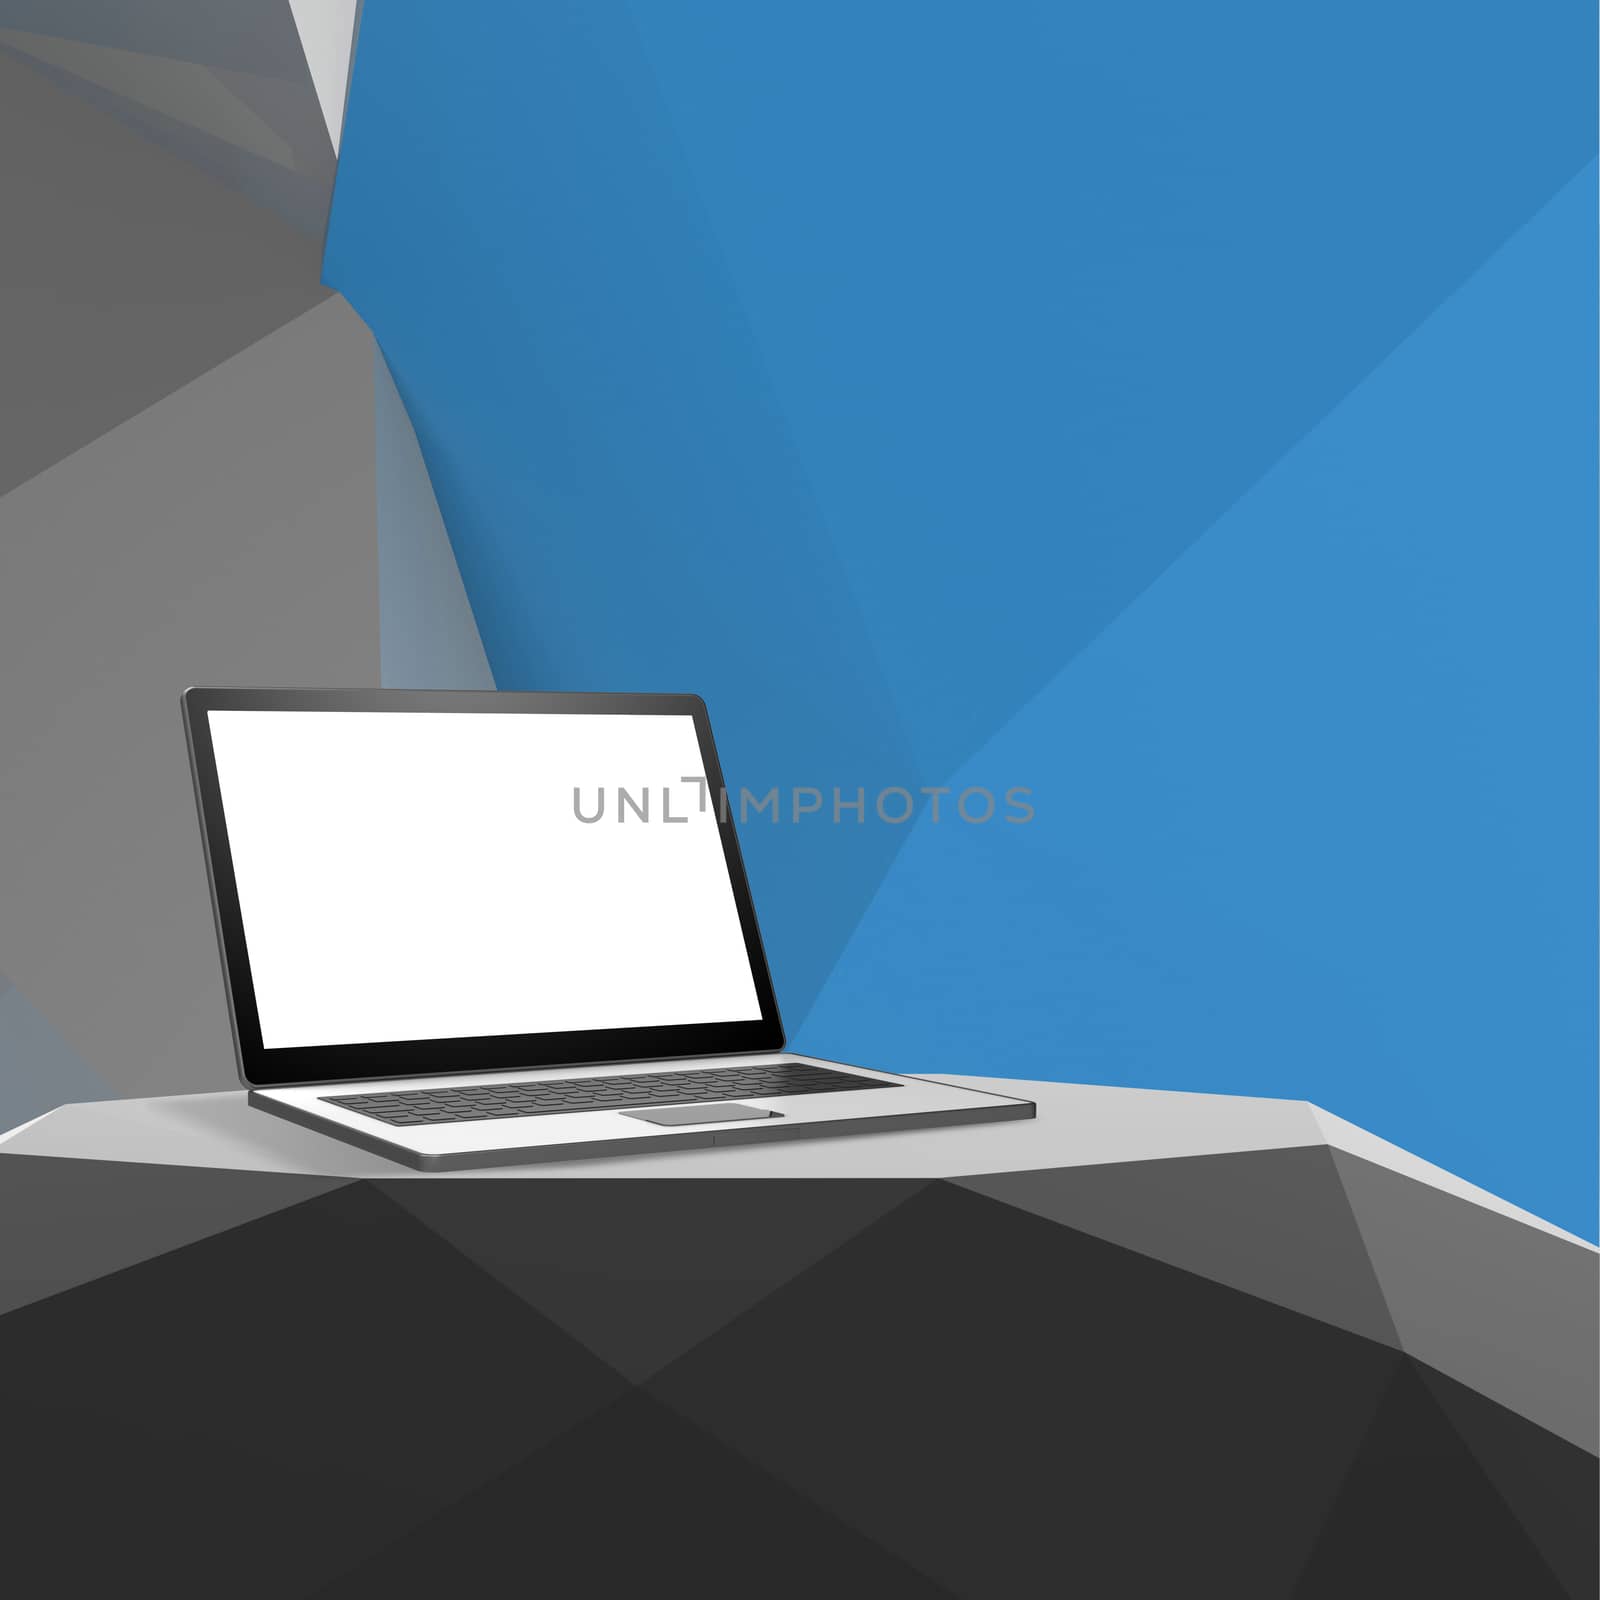 Laptop with blank screen on laminate table and low poly geometric  background